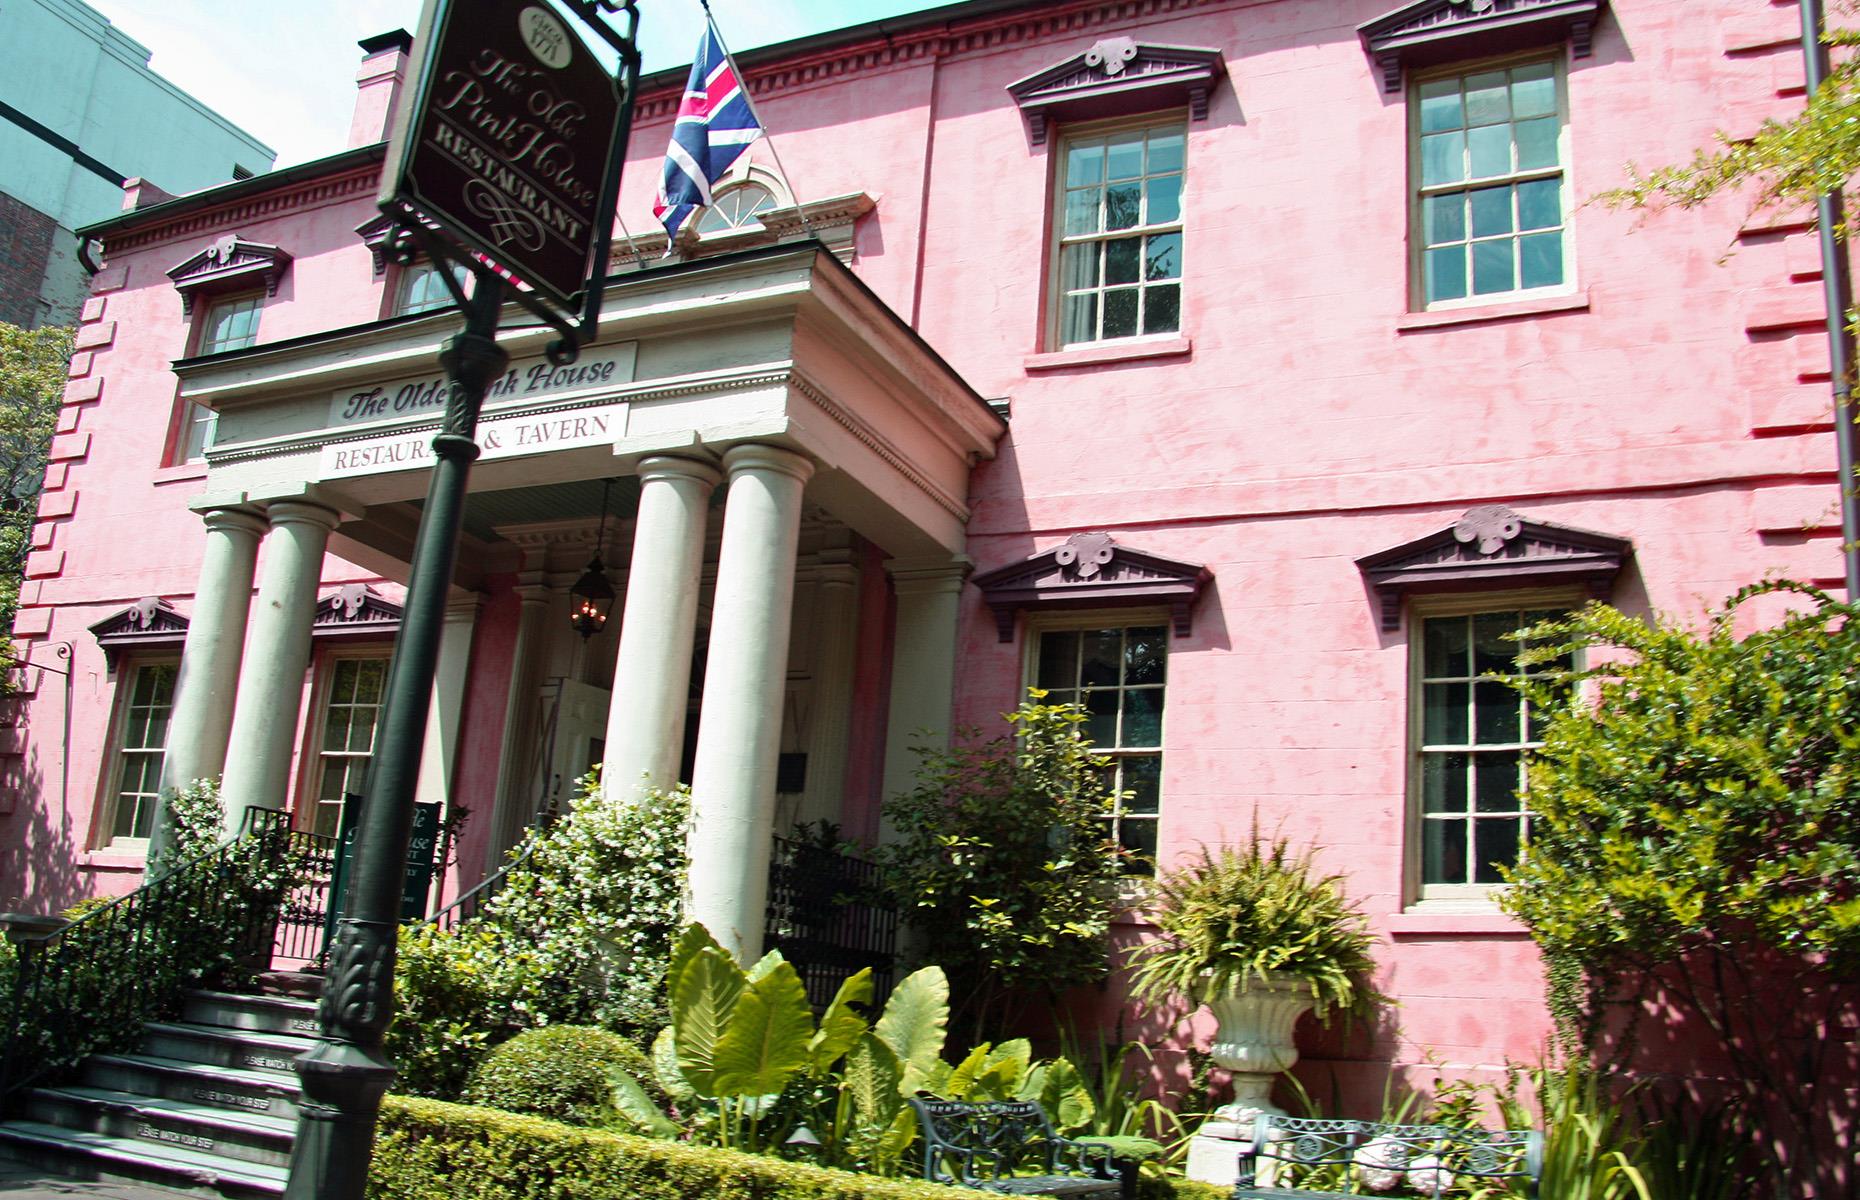 <p>Savannah is known as "The Hostess City of the South" – and apparently it's not just living beings that this sultry Georgia city welcomes. It's renowned for its haunted spots, and the most famous among them is the <a href="https://www.theoldepinkhouserestaurant.com/">Olde Pink House</a>, a Georgian mansion and restaurant that dates back to 1771. It's said that the spirit of original owner James Habersham Jr, a merchant and Revolutionary War figure, still wanders about the place.</p>